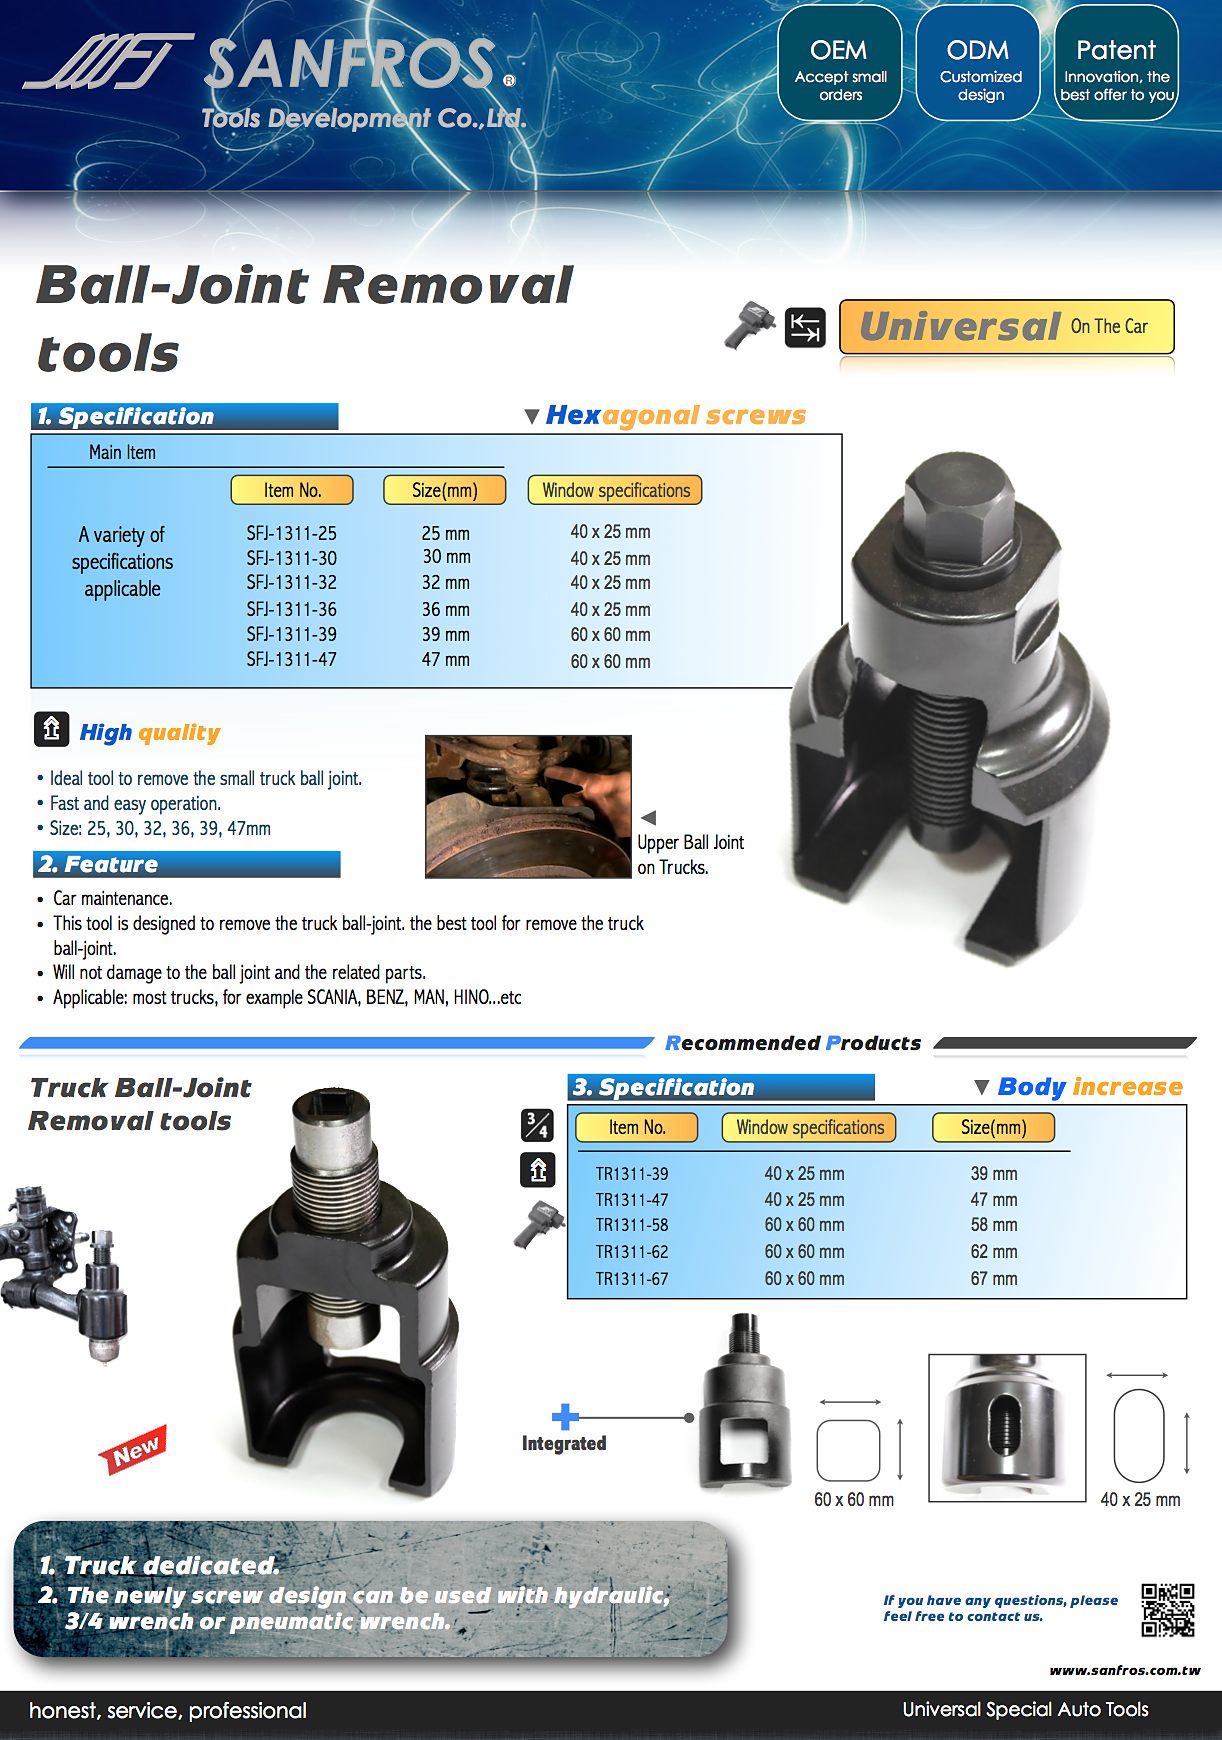 Ball-Joint Removal tools